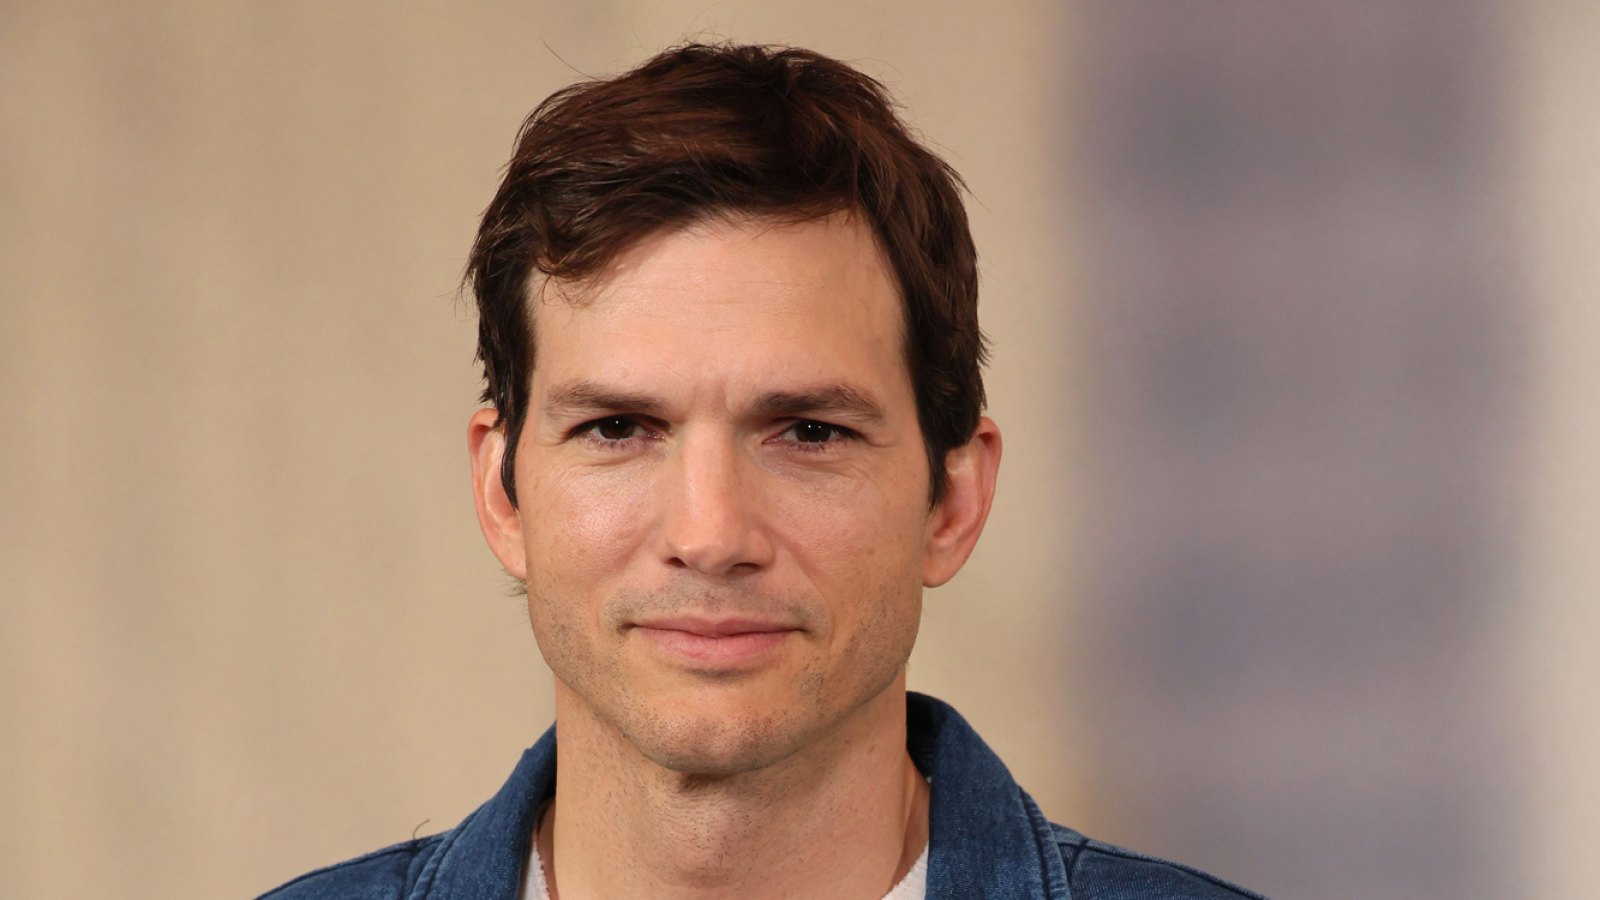 Ashton Kutcher Reveals He Stopped Smoking Weed After Having a Vasectomy